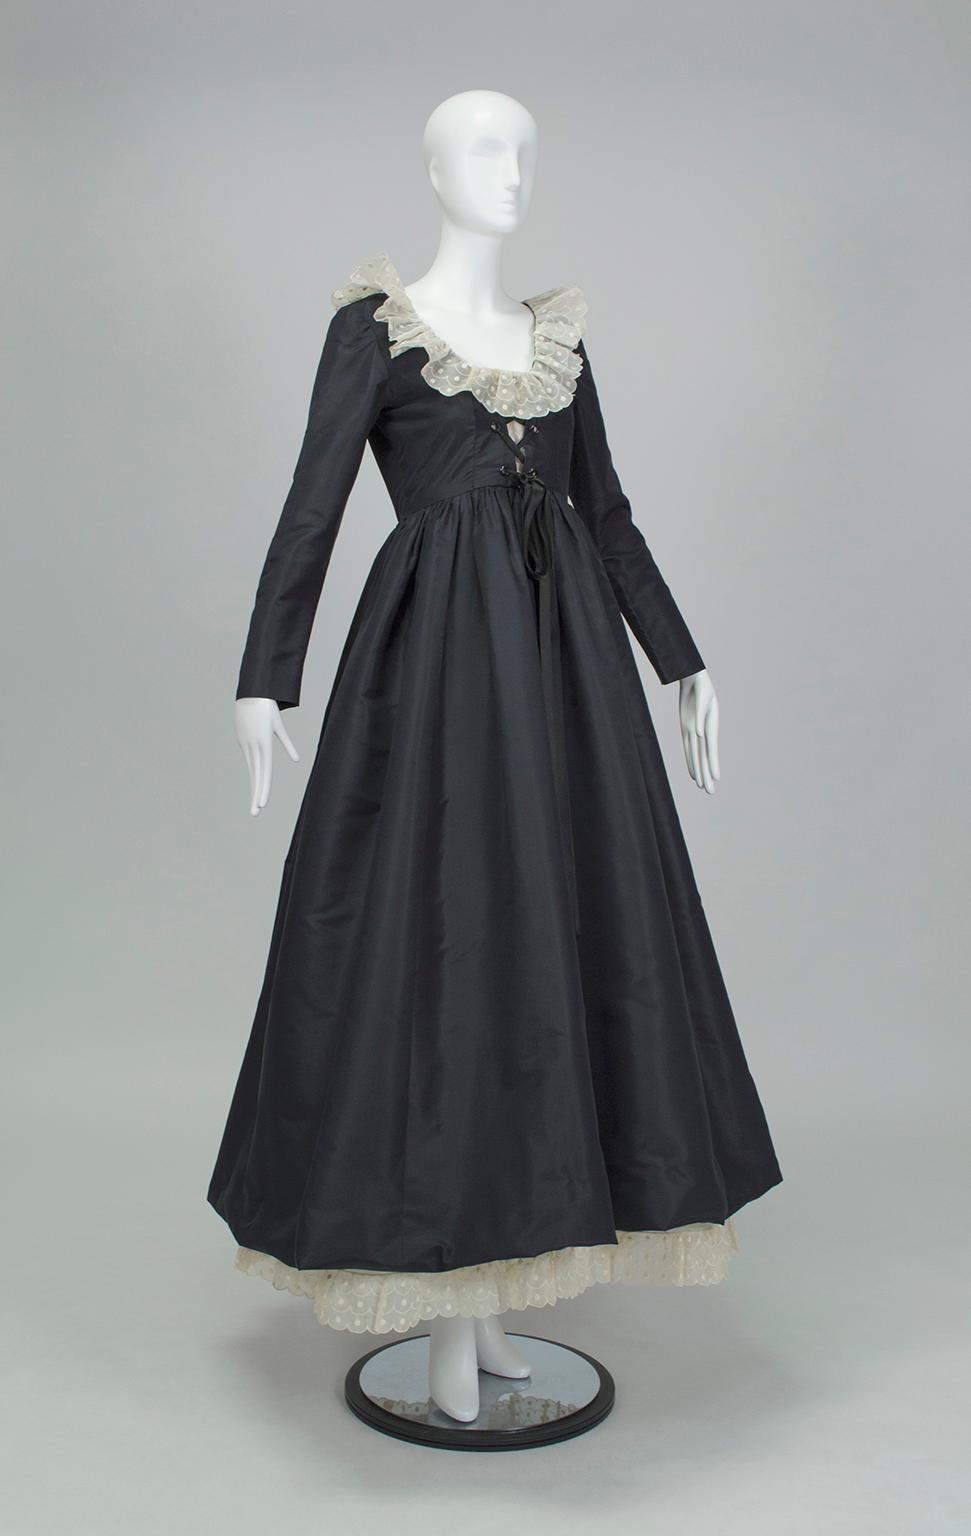 Navy blue Elizabethan style gown with long sleeves, close-fitting bodice and full skirt.  Bodice features low scooping neckline with 3” antique white scalloped organza eyelet ruffle and corset-laced front threaded with black satin ribbon; matching